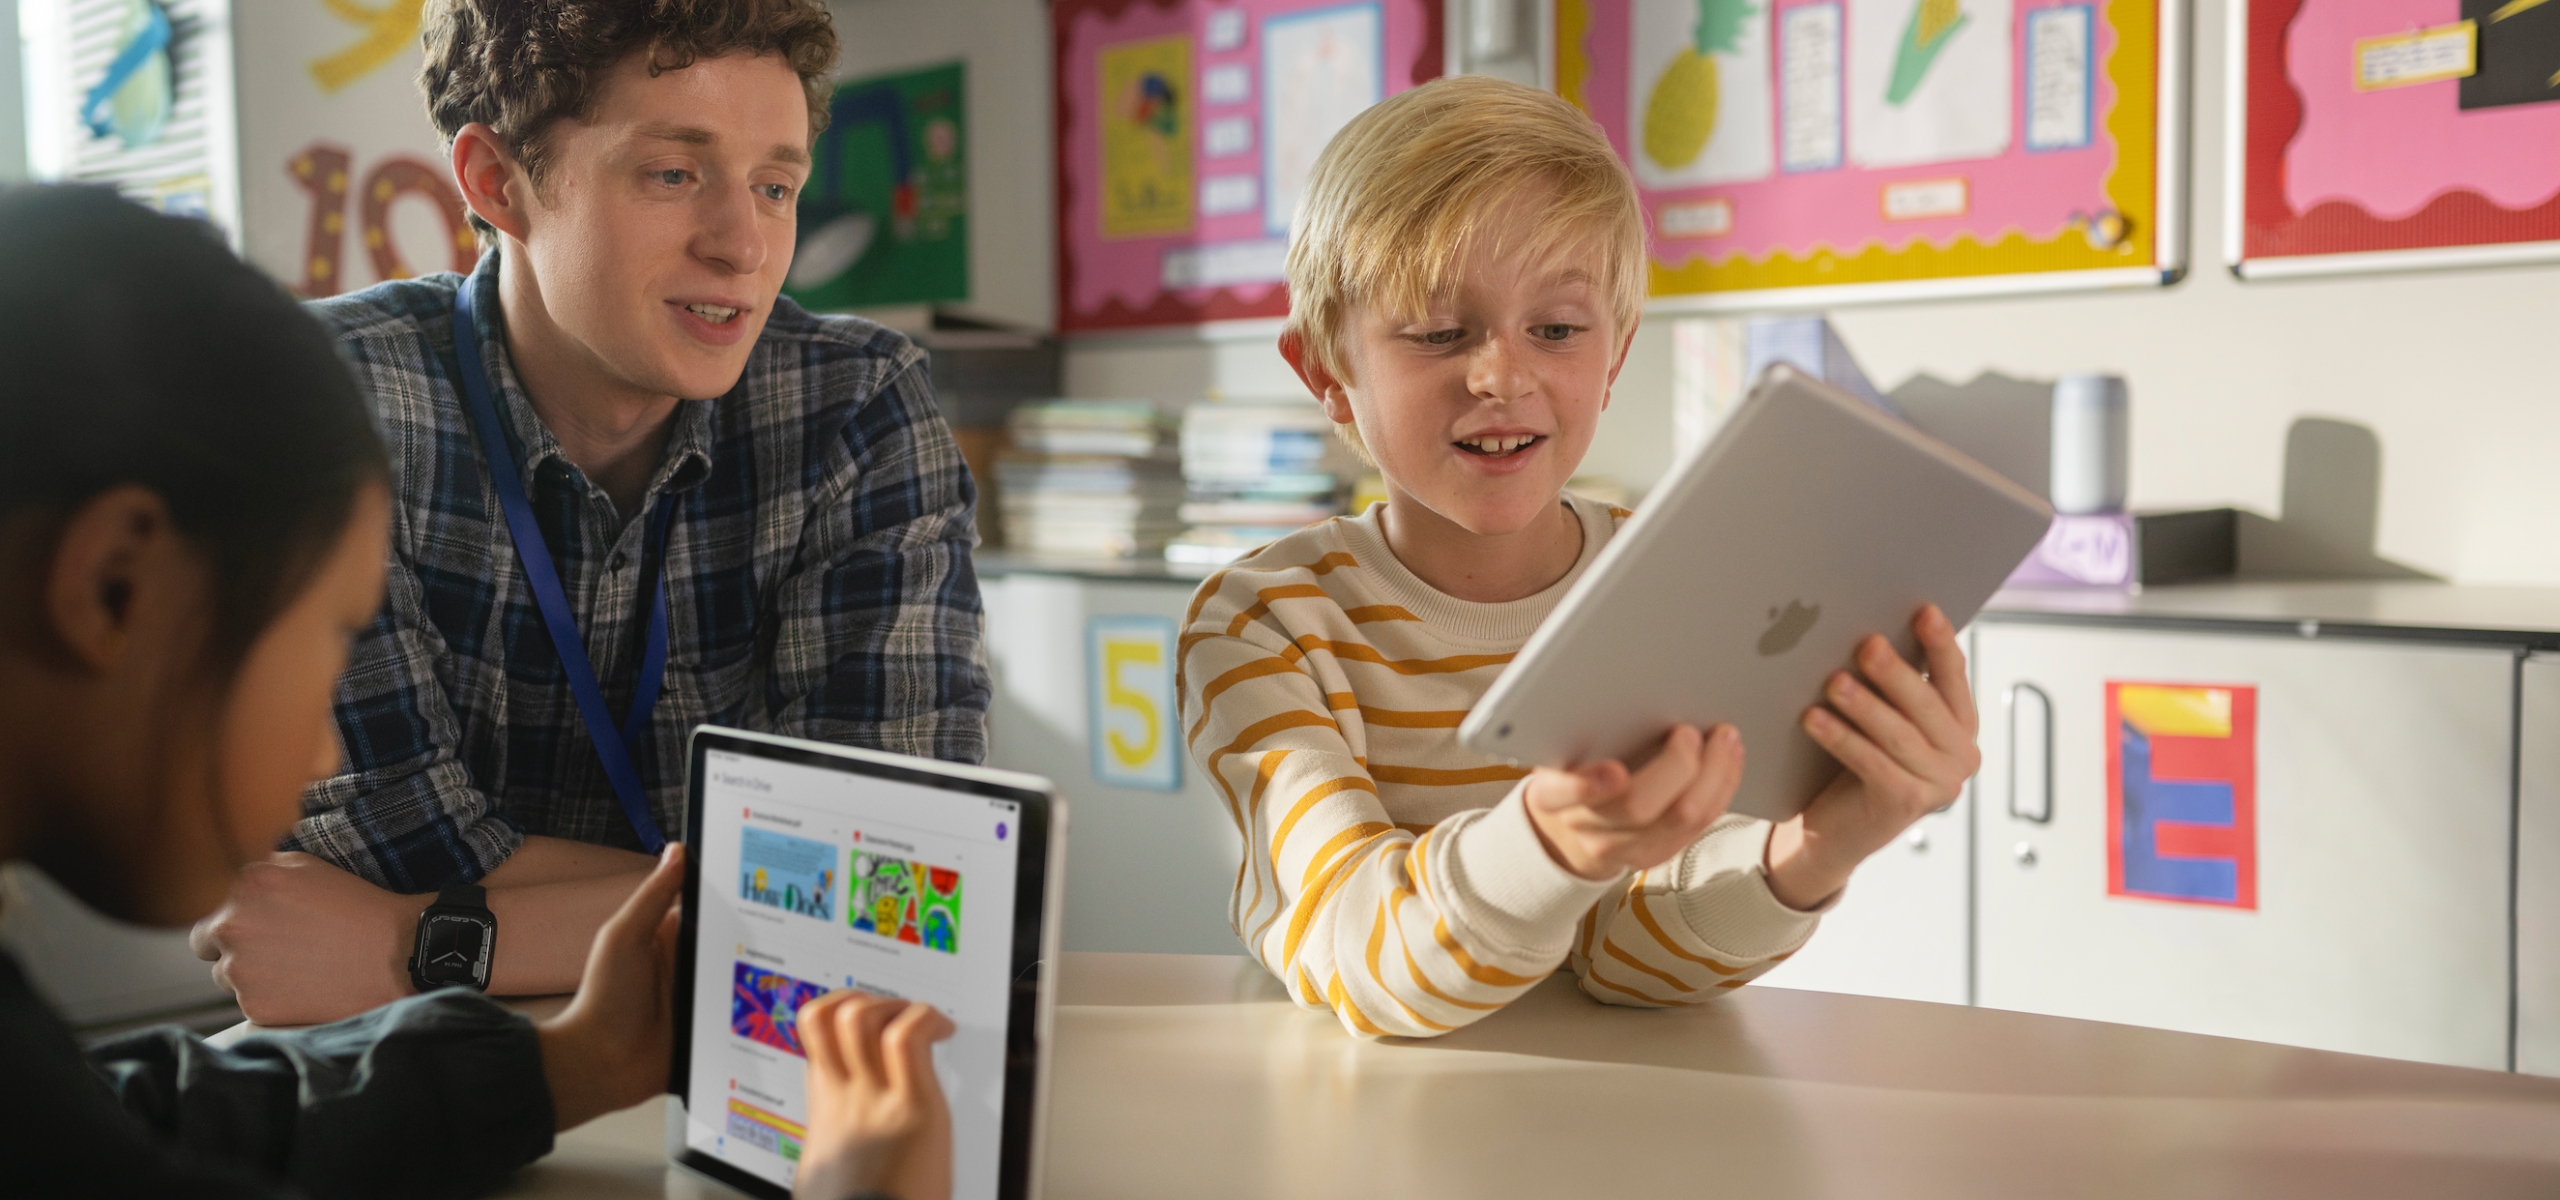 Teacher supporting students with iPad